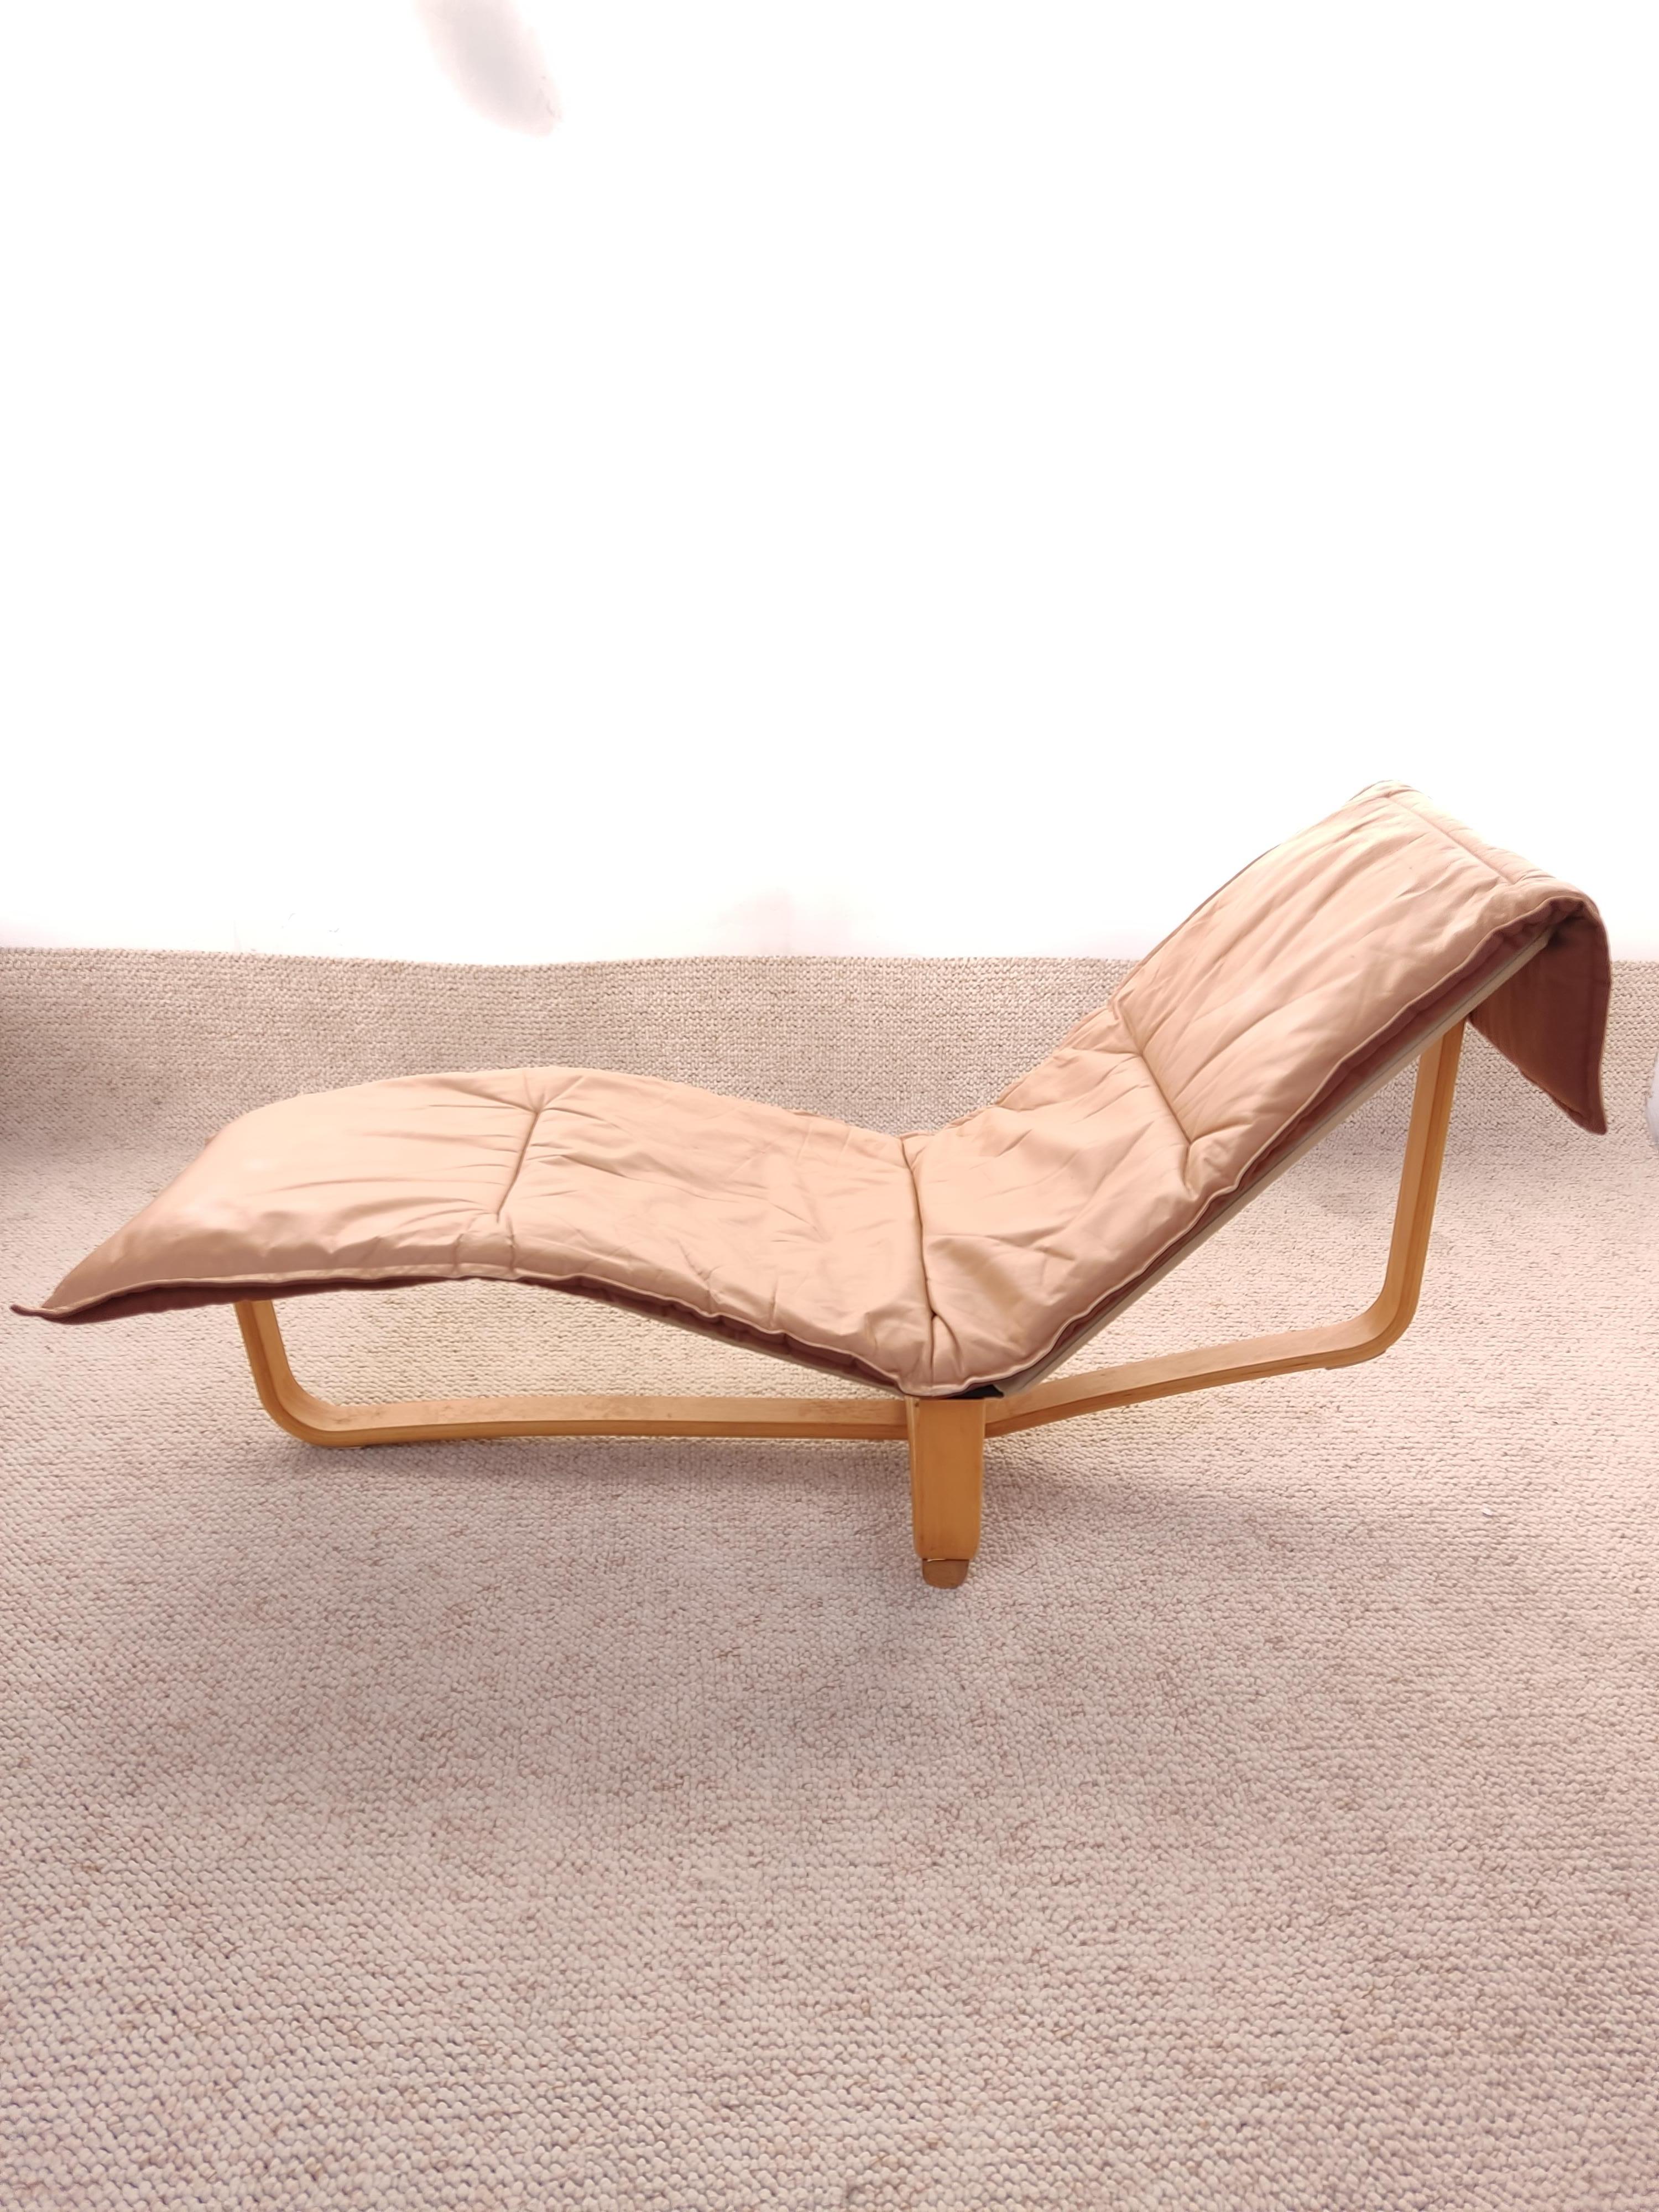 Chaise-Longue Ingmar & Relling, Camel Leather, 1970 3